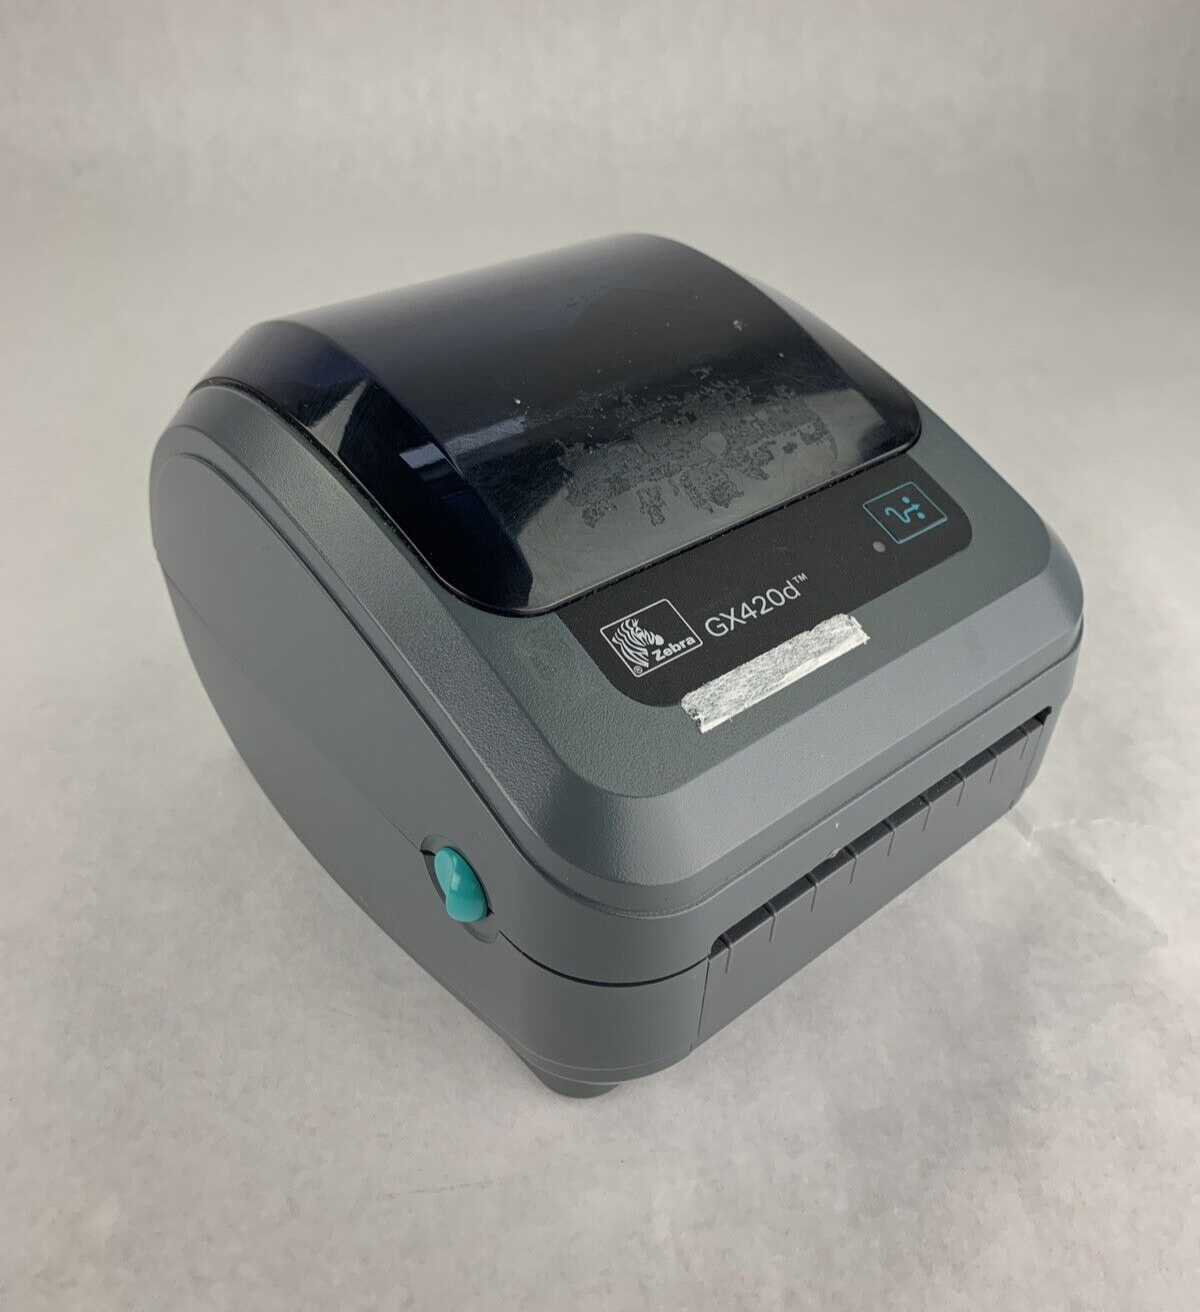 Zebra GX430t Thermal Label Printer Bad Roller For Parts and Repair No AC Adapter